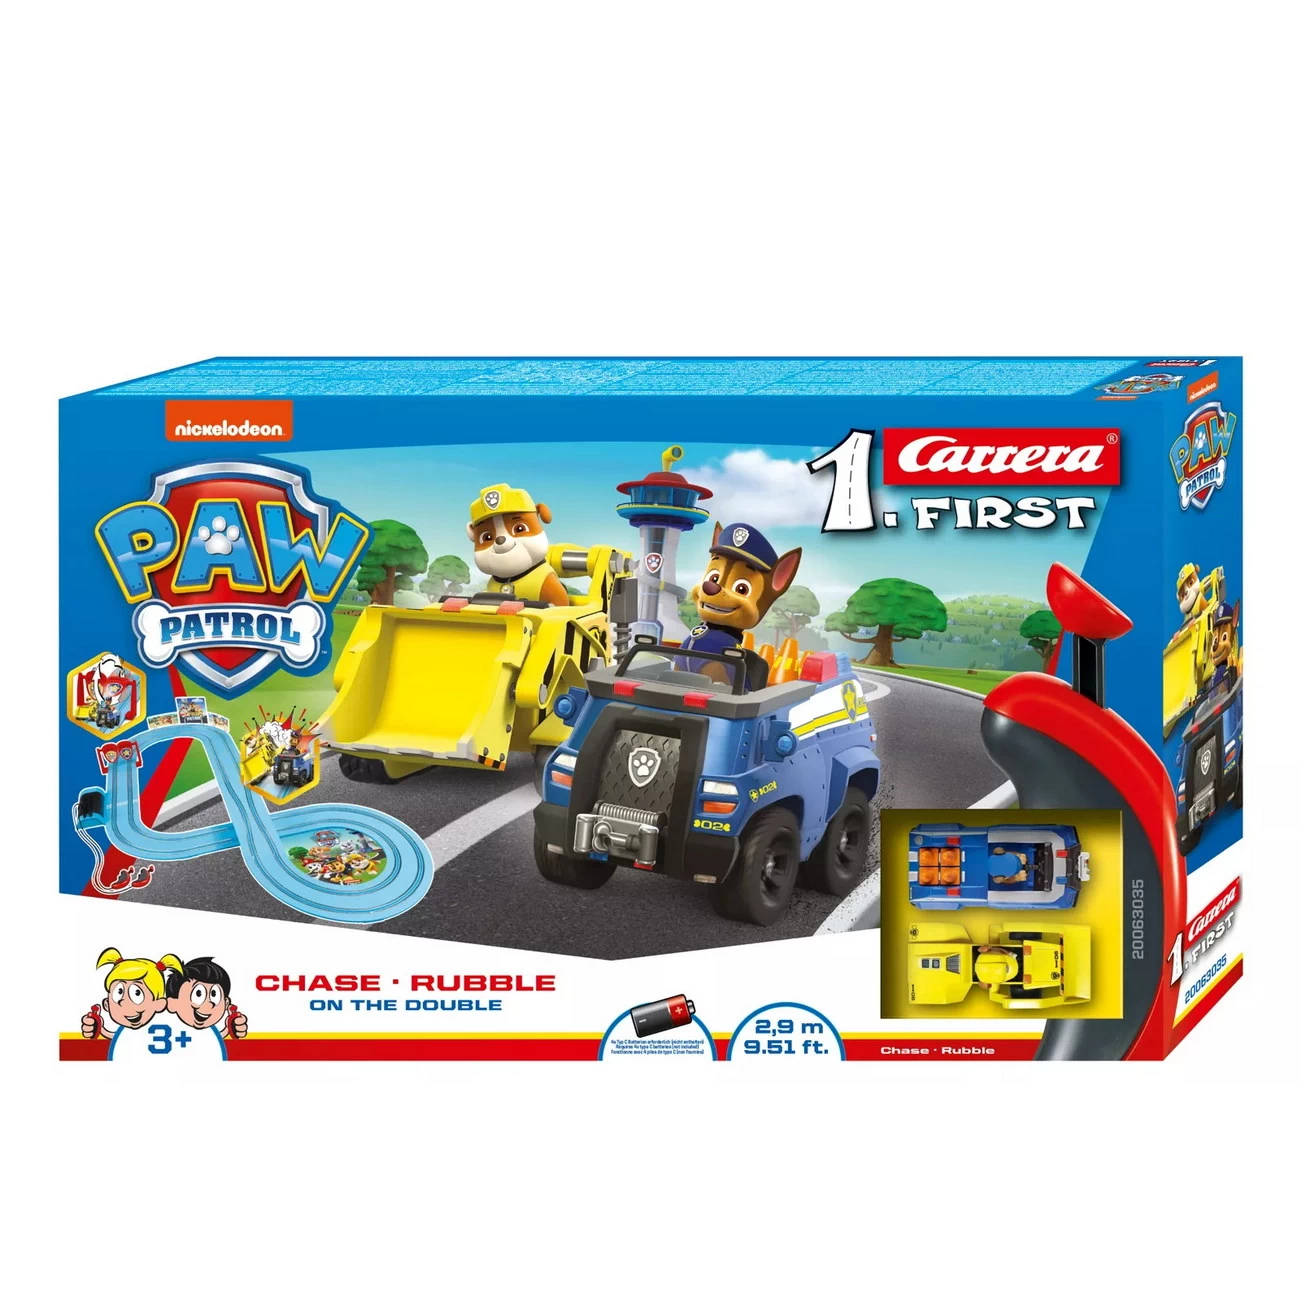 Carrera FIRST - PAW PATROL - On the Double (20063035)